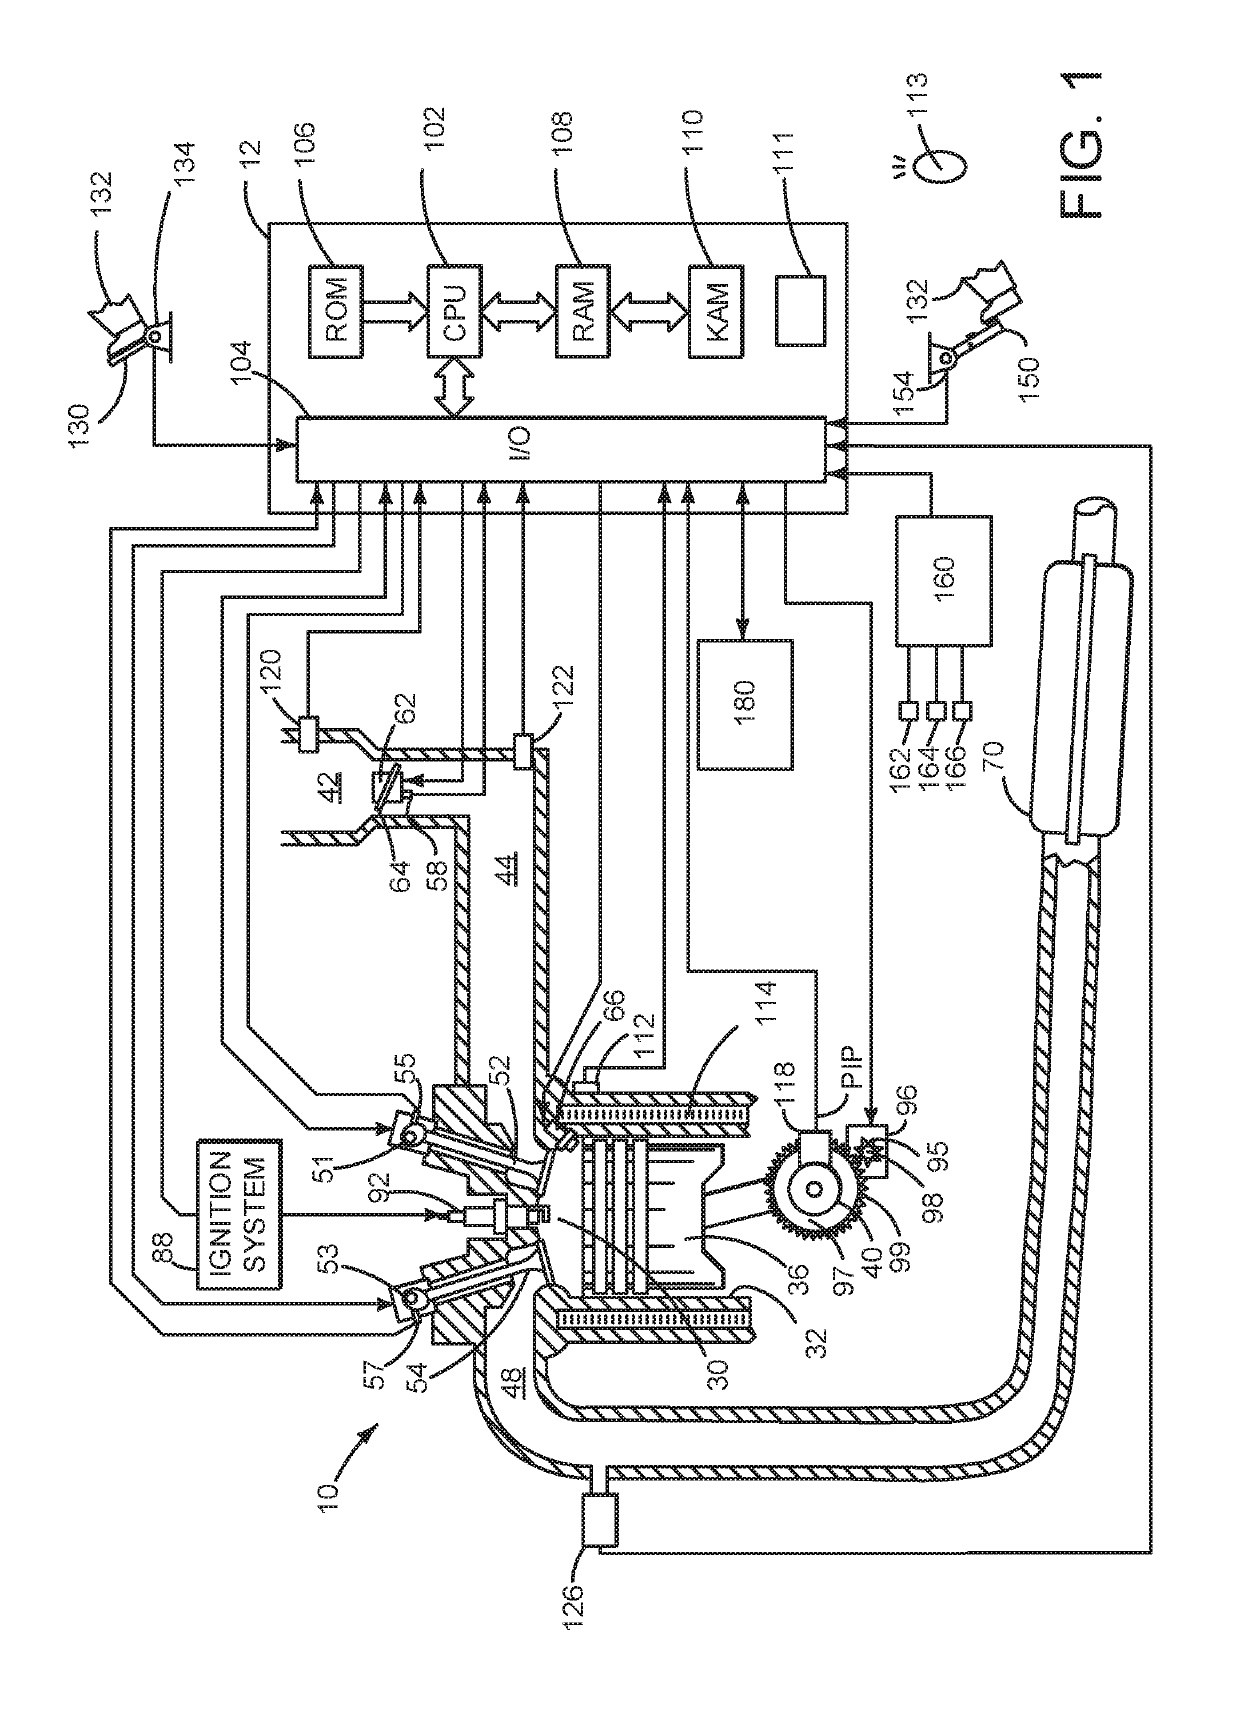 Methods and systems for improving automatic engine stopping and starting